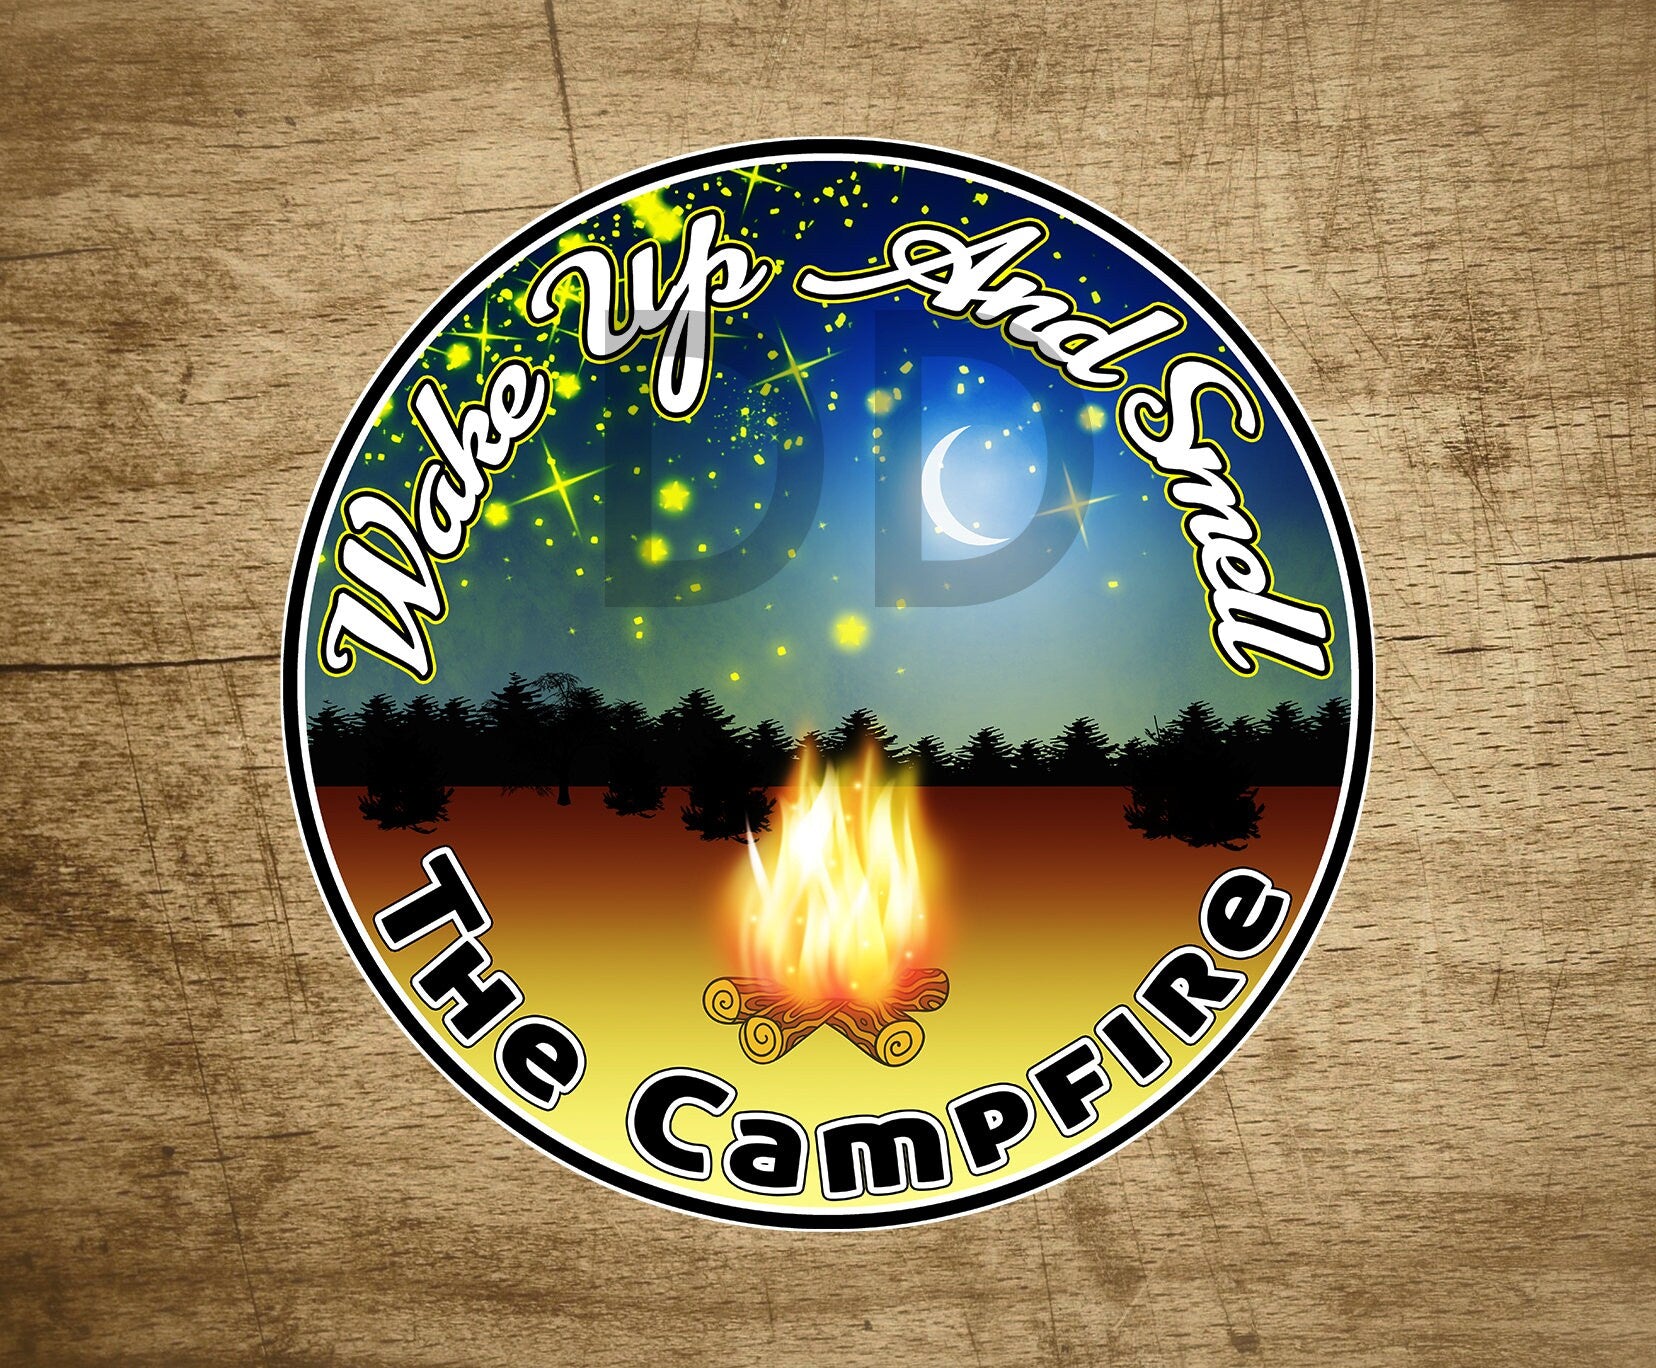 Camping National Park Wake Up And Smell The Campfire Sticker Decal Vinyl 3.5" x 3.5"